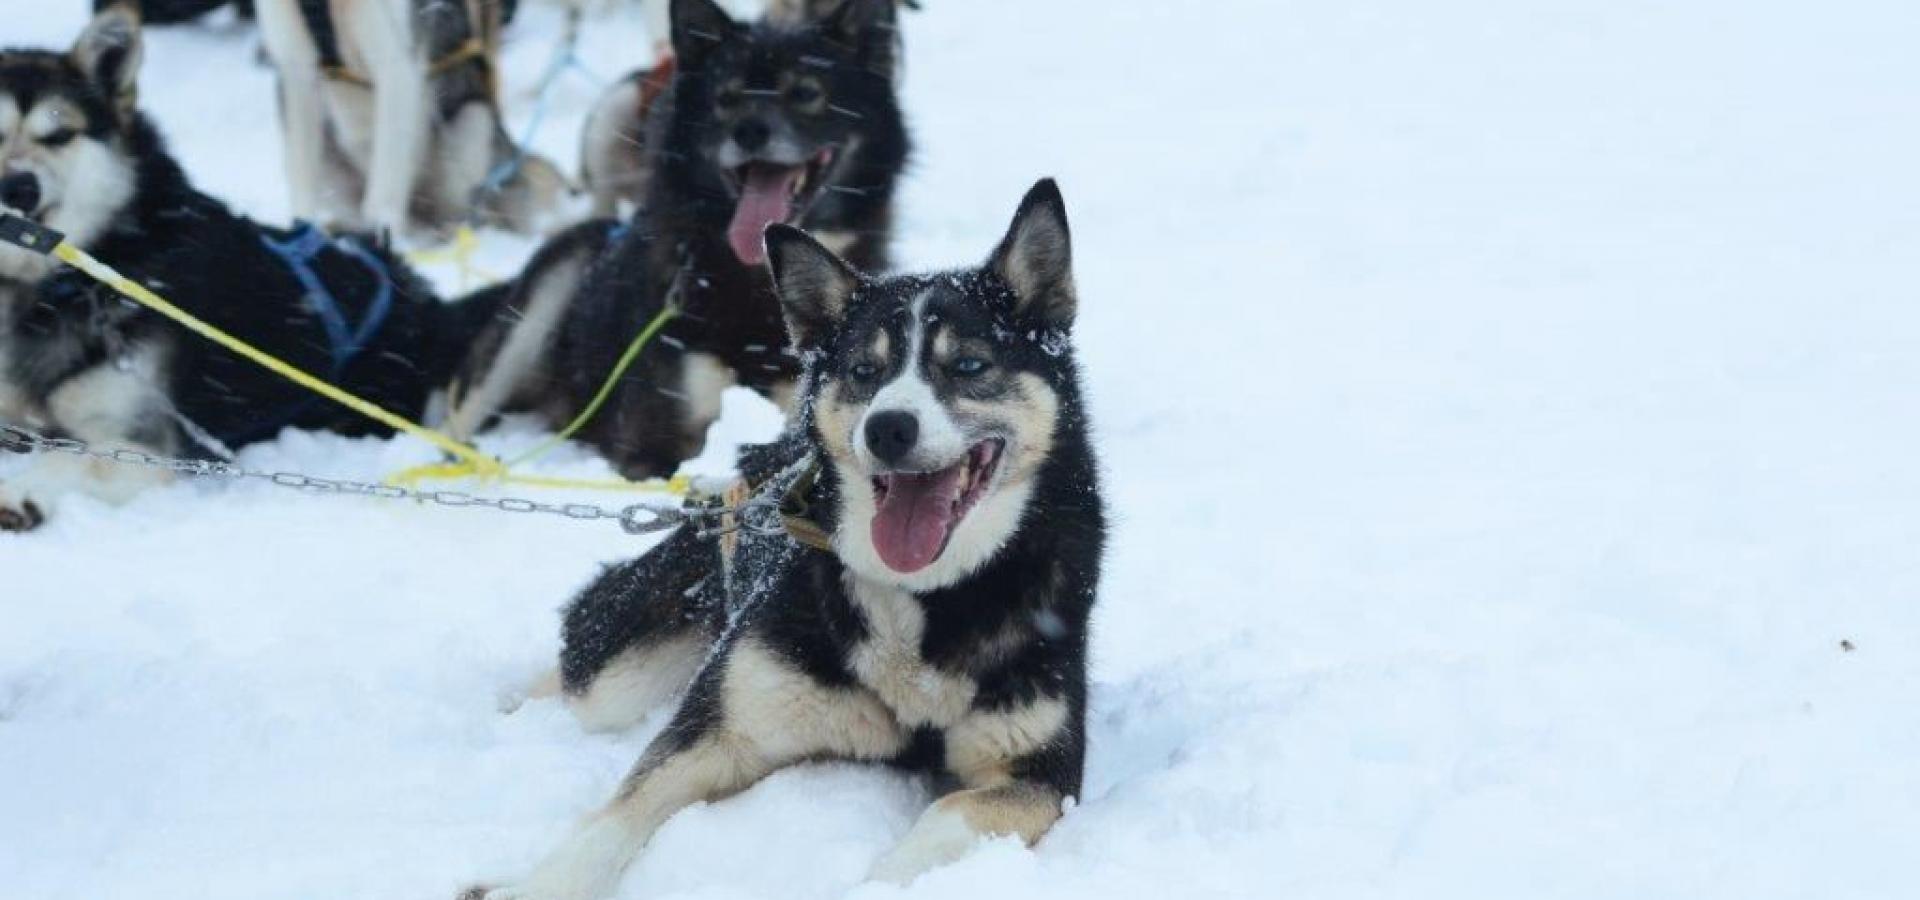 Winter activities in Skibotn - Snowmobile in the morning and dog sledding in the evening